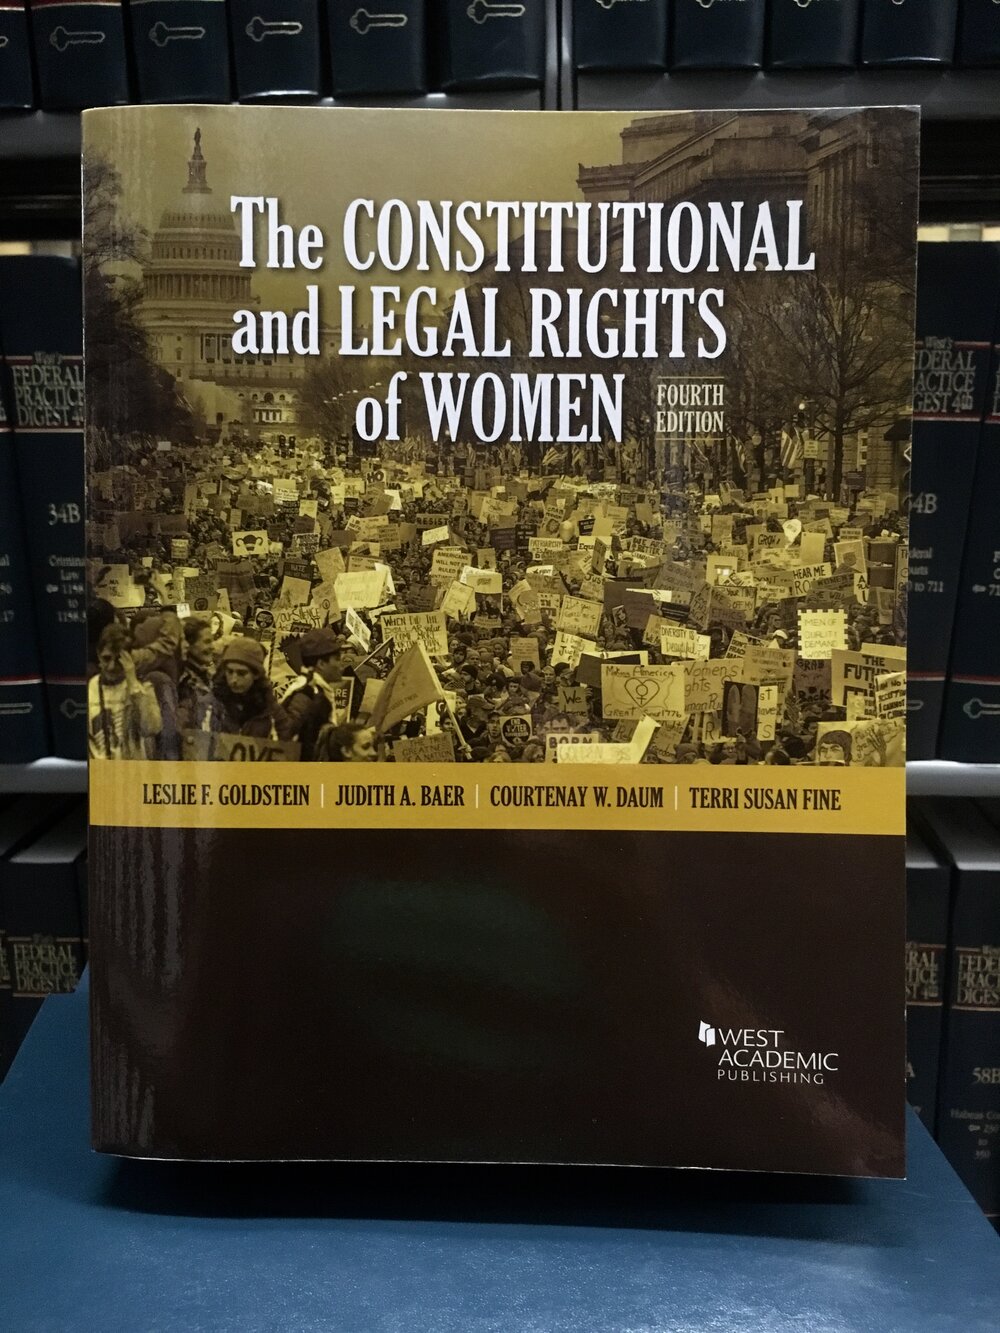 By Leslie F. Goldstein, Judith A. Baer, Courtenay W. Daum, &amp; Terri Susan Fine Published by West Academic Publishing KF 4758 .A7 G66 2019 Photo Credit: Jessica King